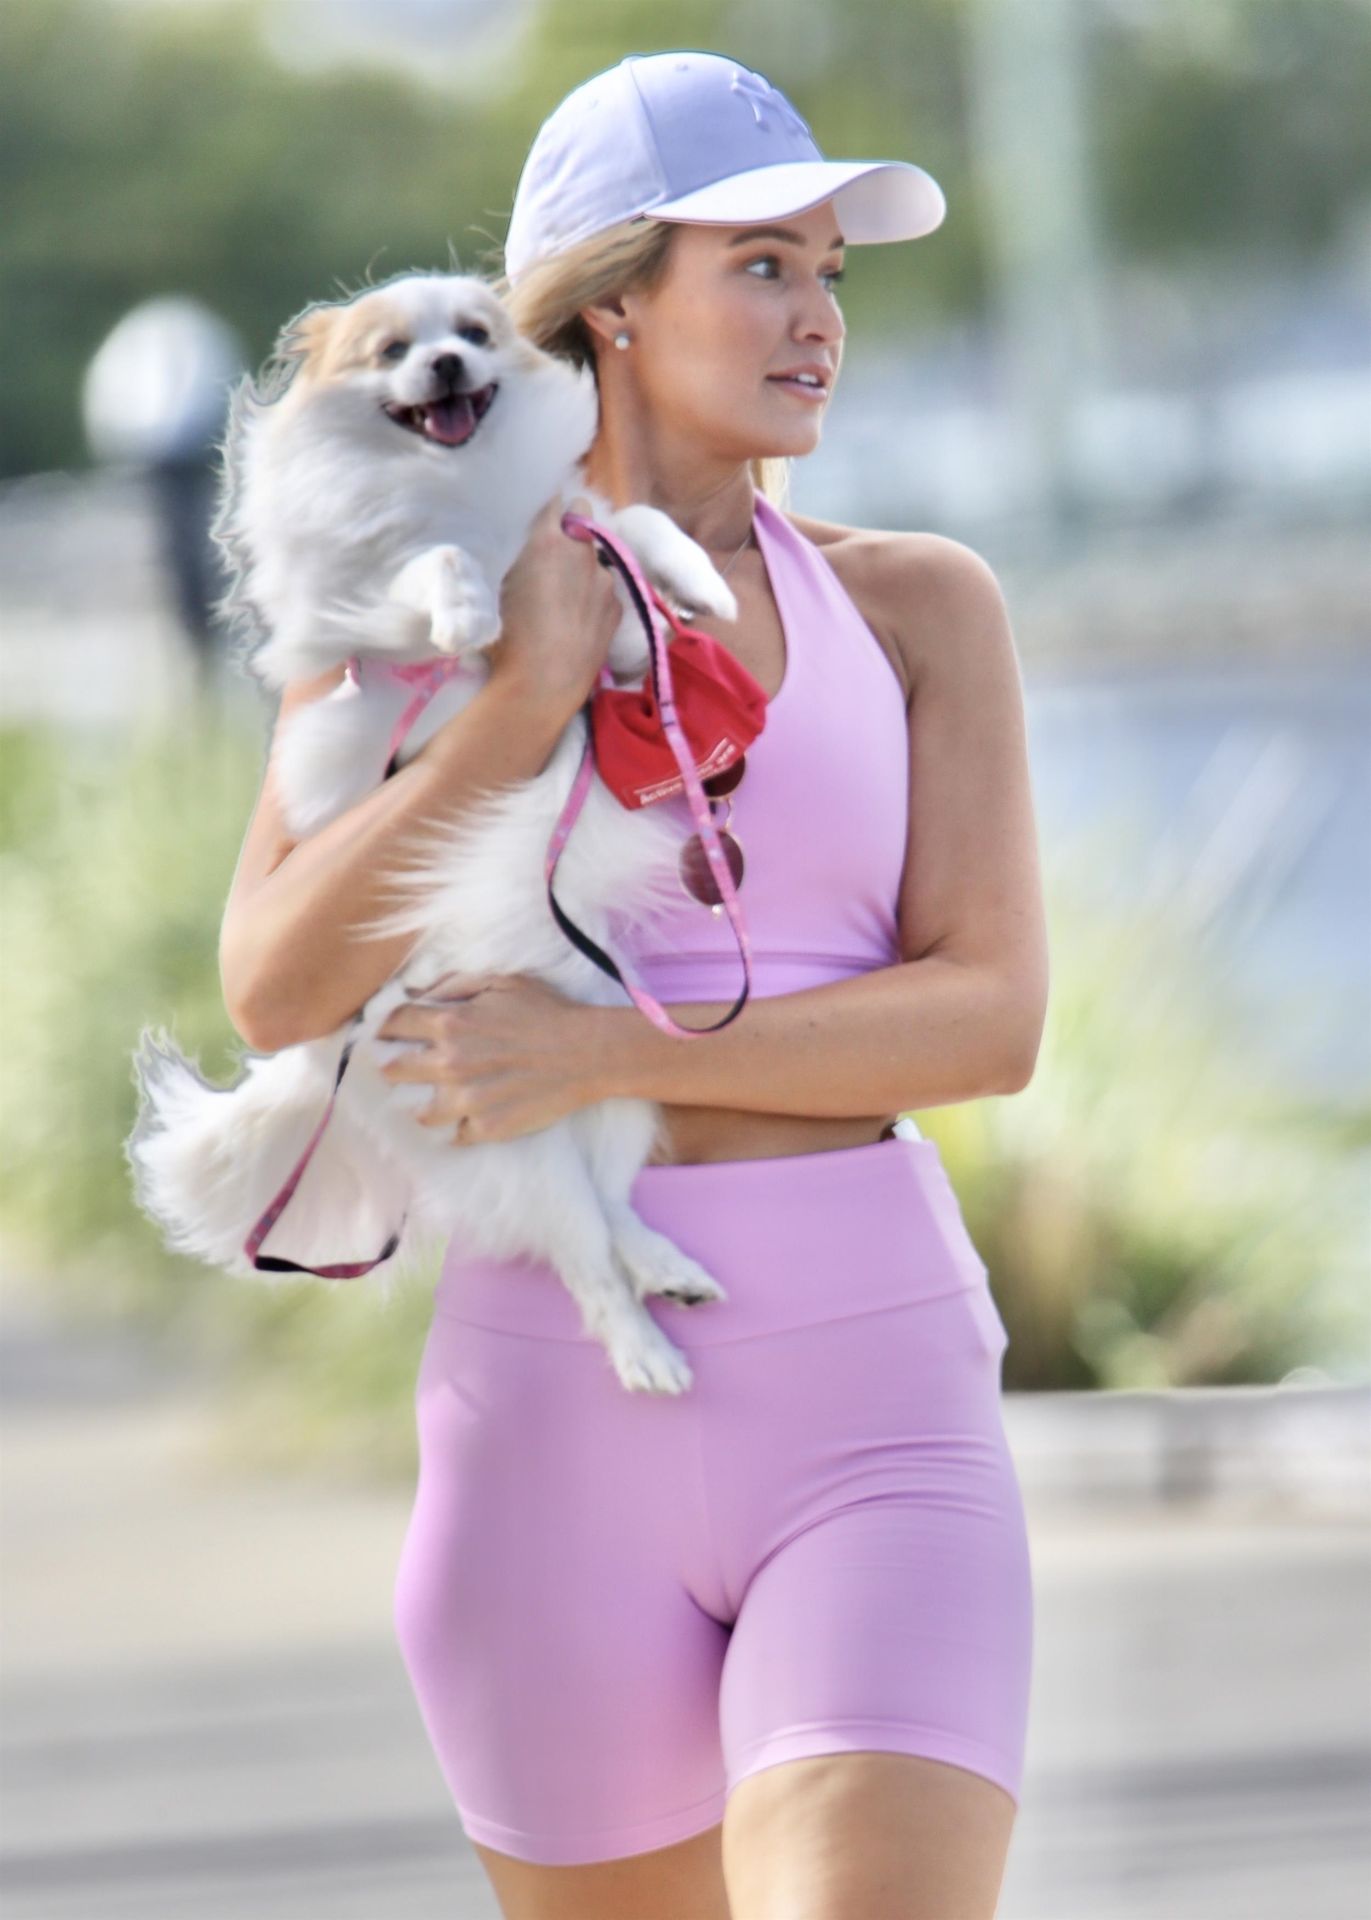 Gemma White is Seen in a Pink Outfit on the Gold Coast (9 Photos)